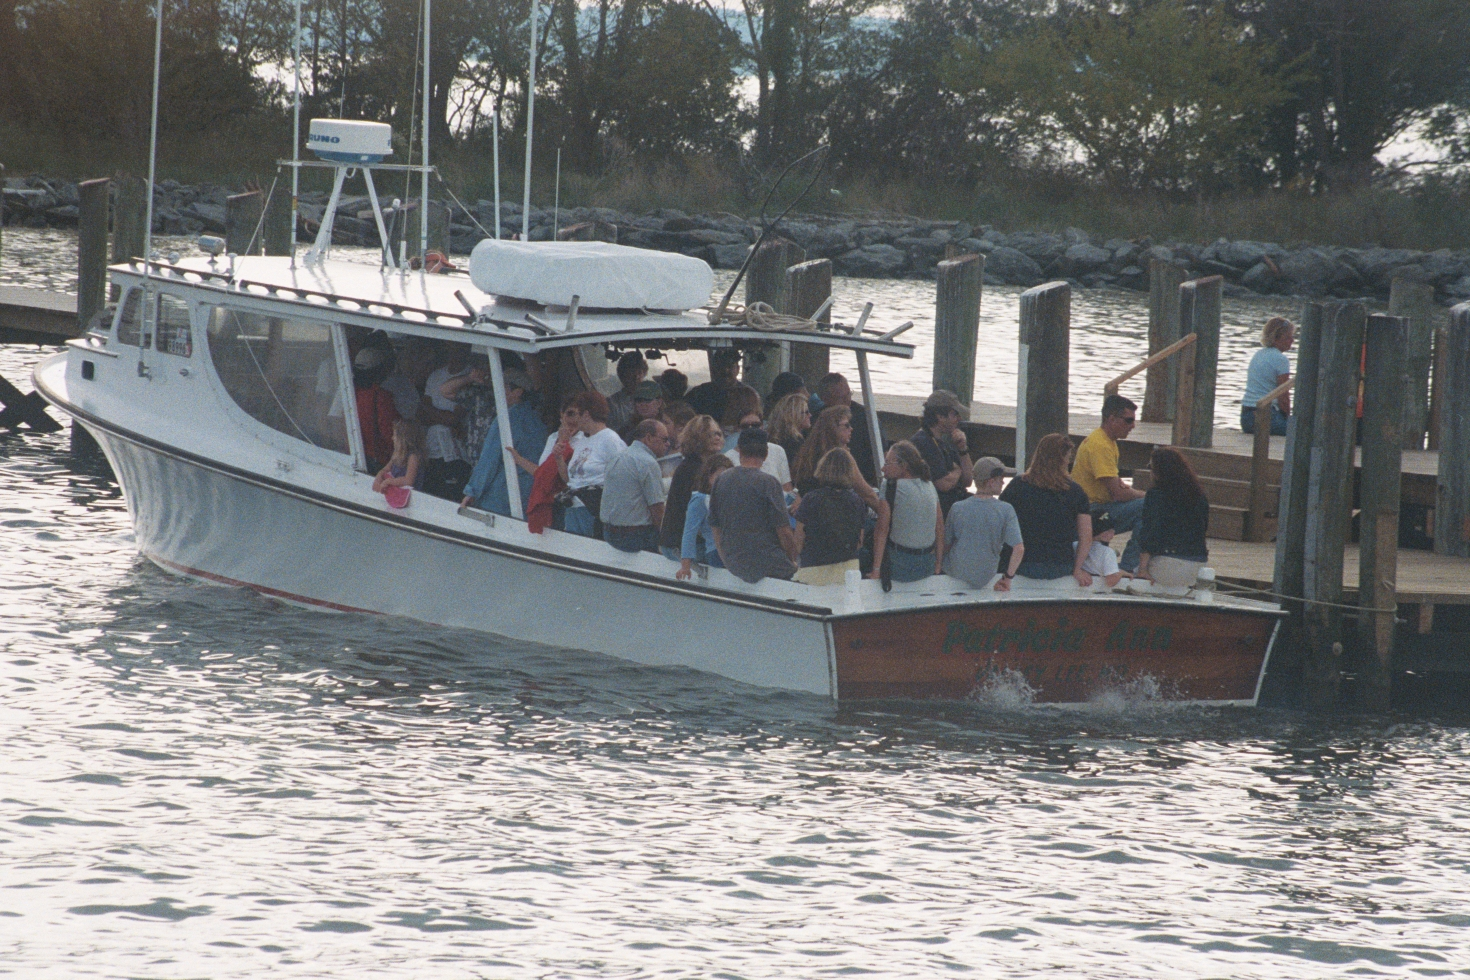 The Patricia Ann is a legally operated charter boat. THE CHESAPEAKE TODAY photo